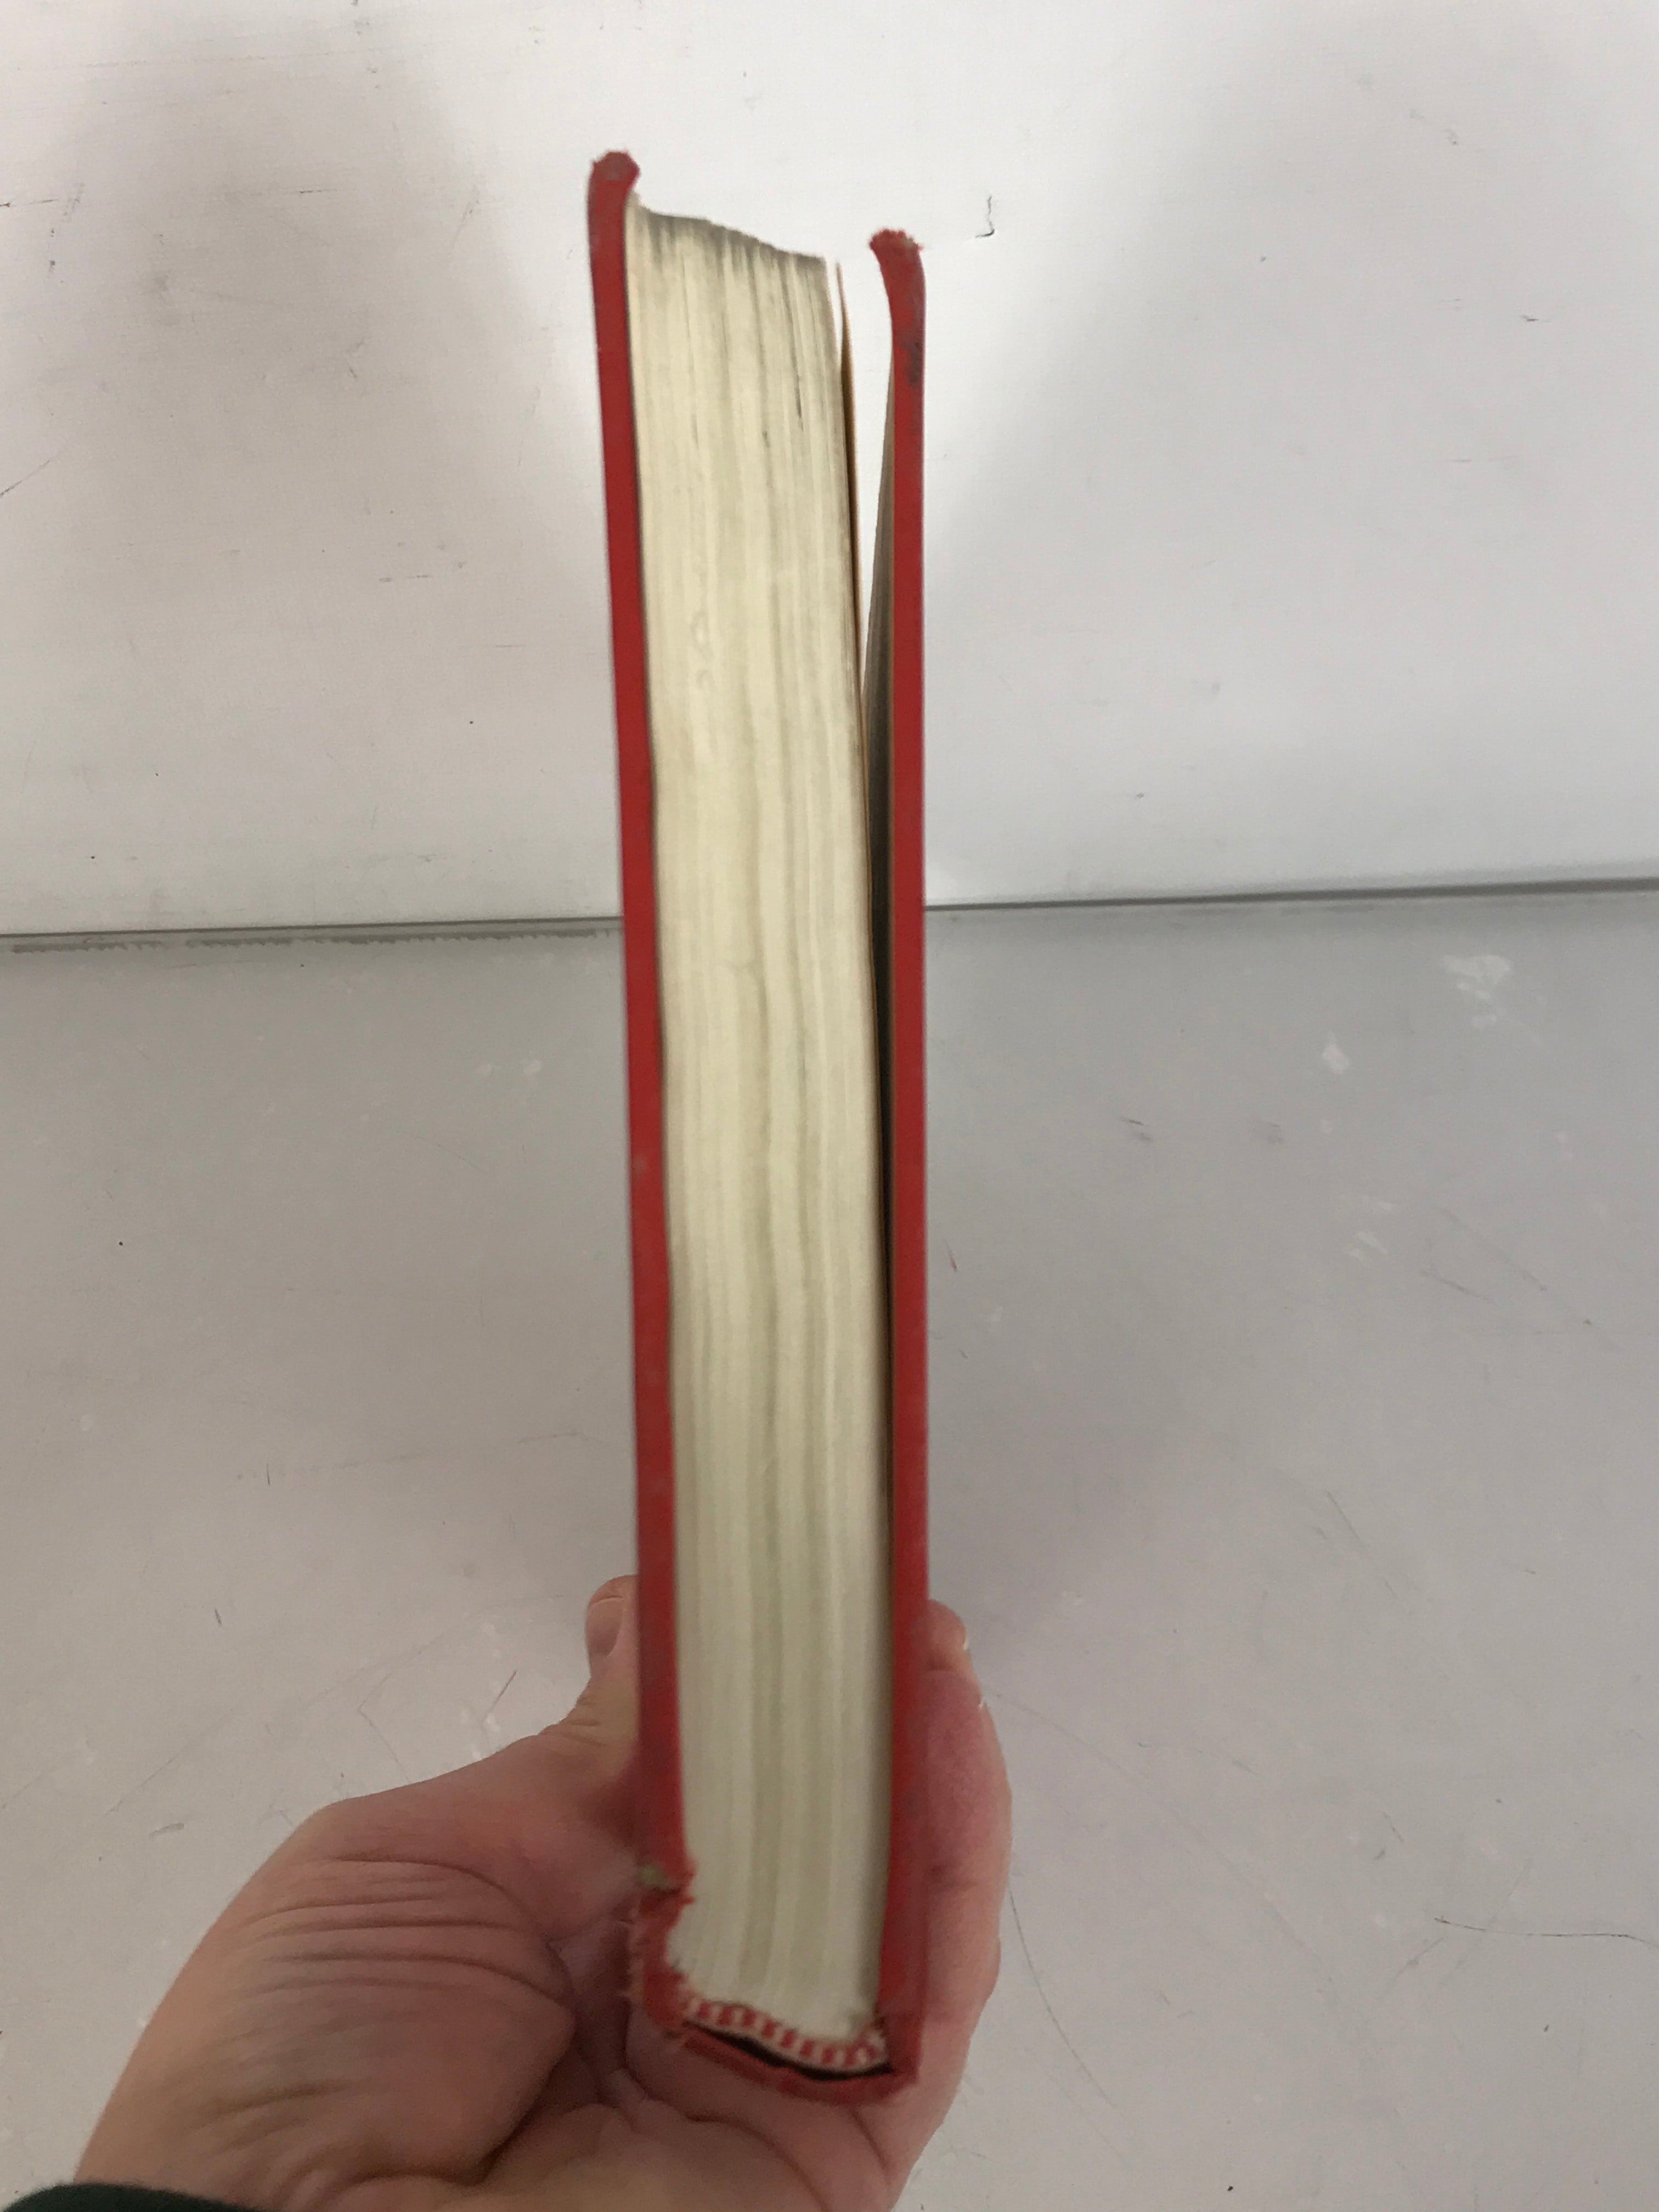 The Human Nervous System by Murray L. Barr First Edition 1972 HC